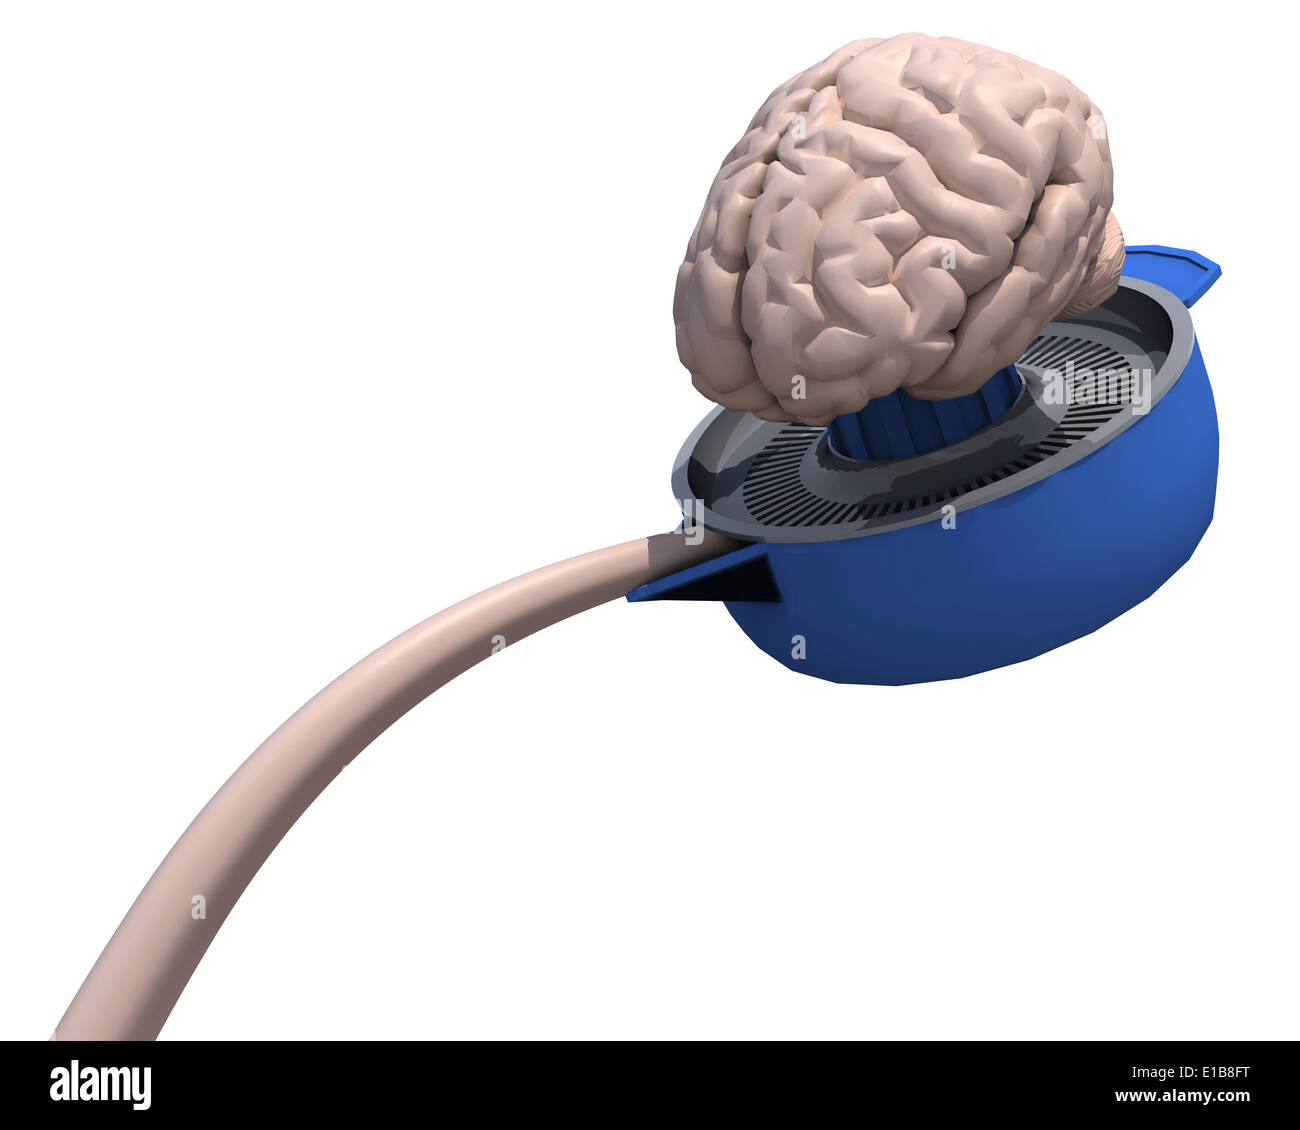 human brain squeezed on juicer, 3d illustration Stock Photo - Alamy